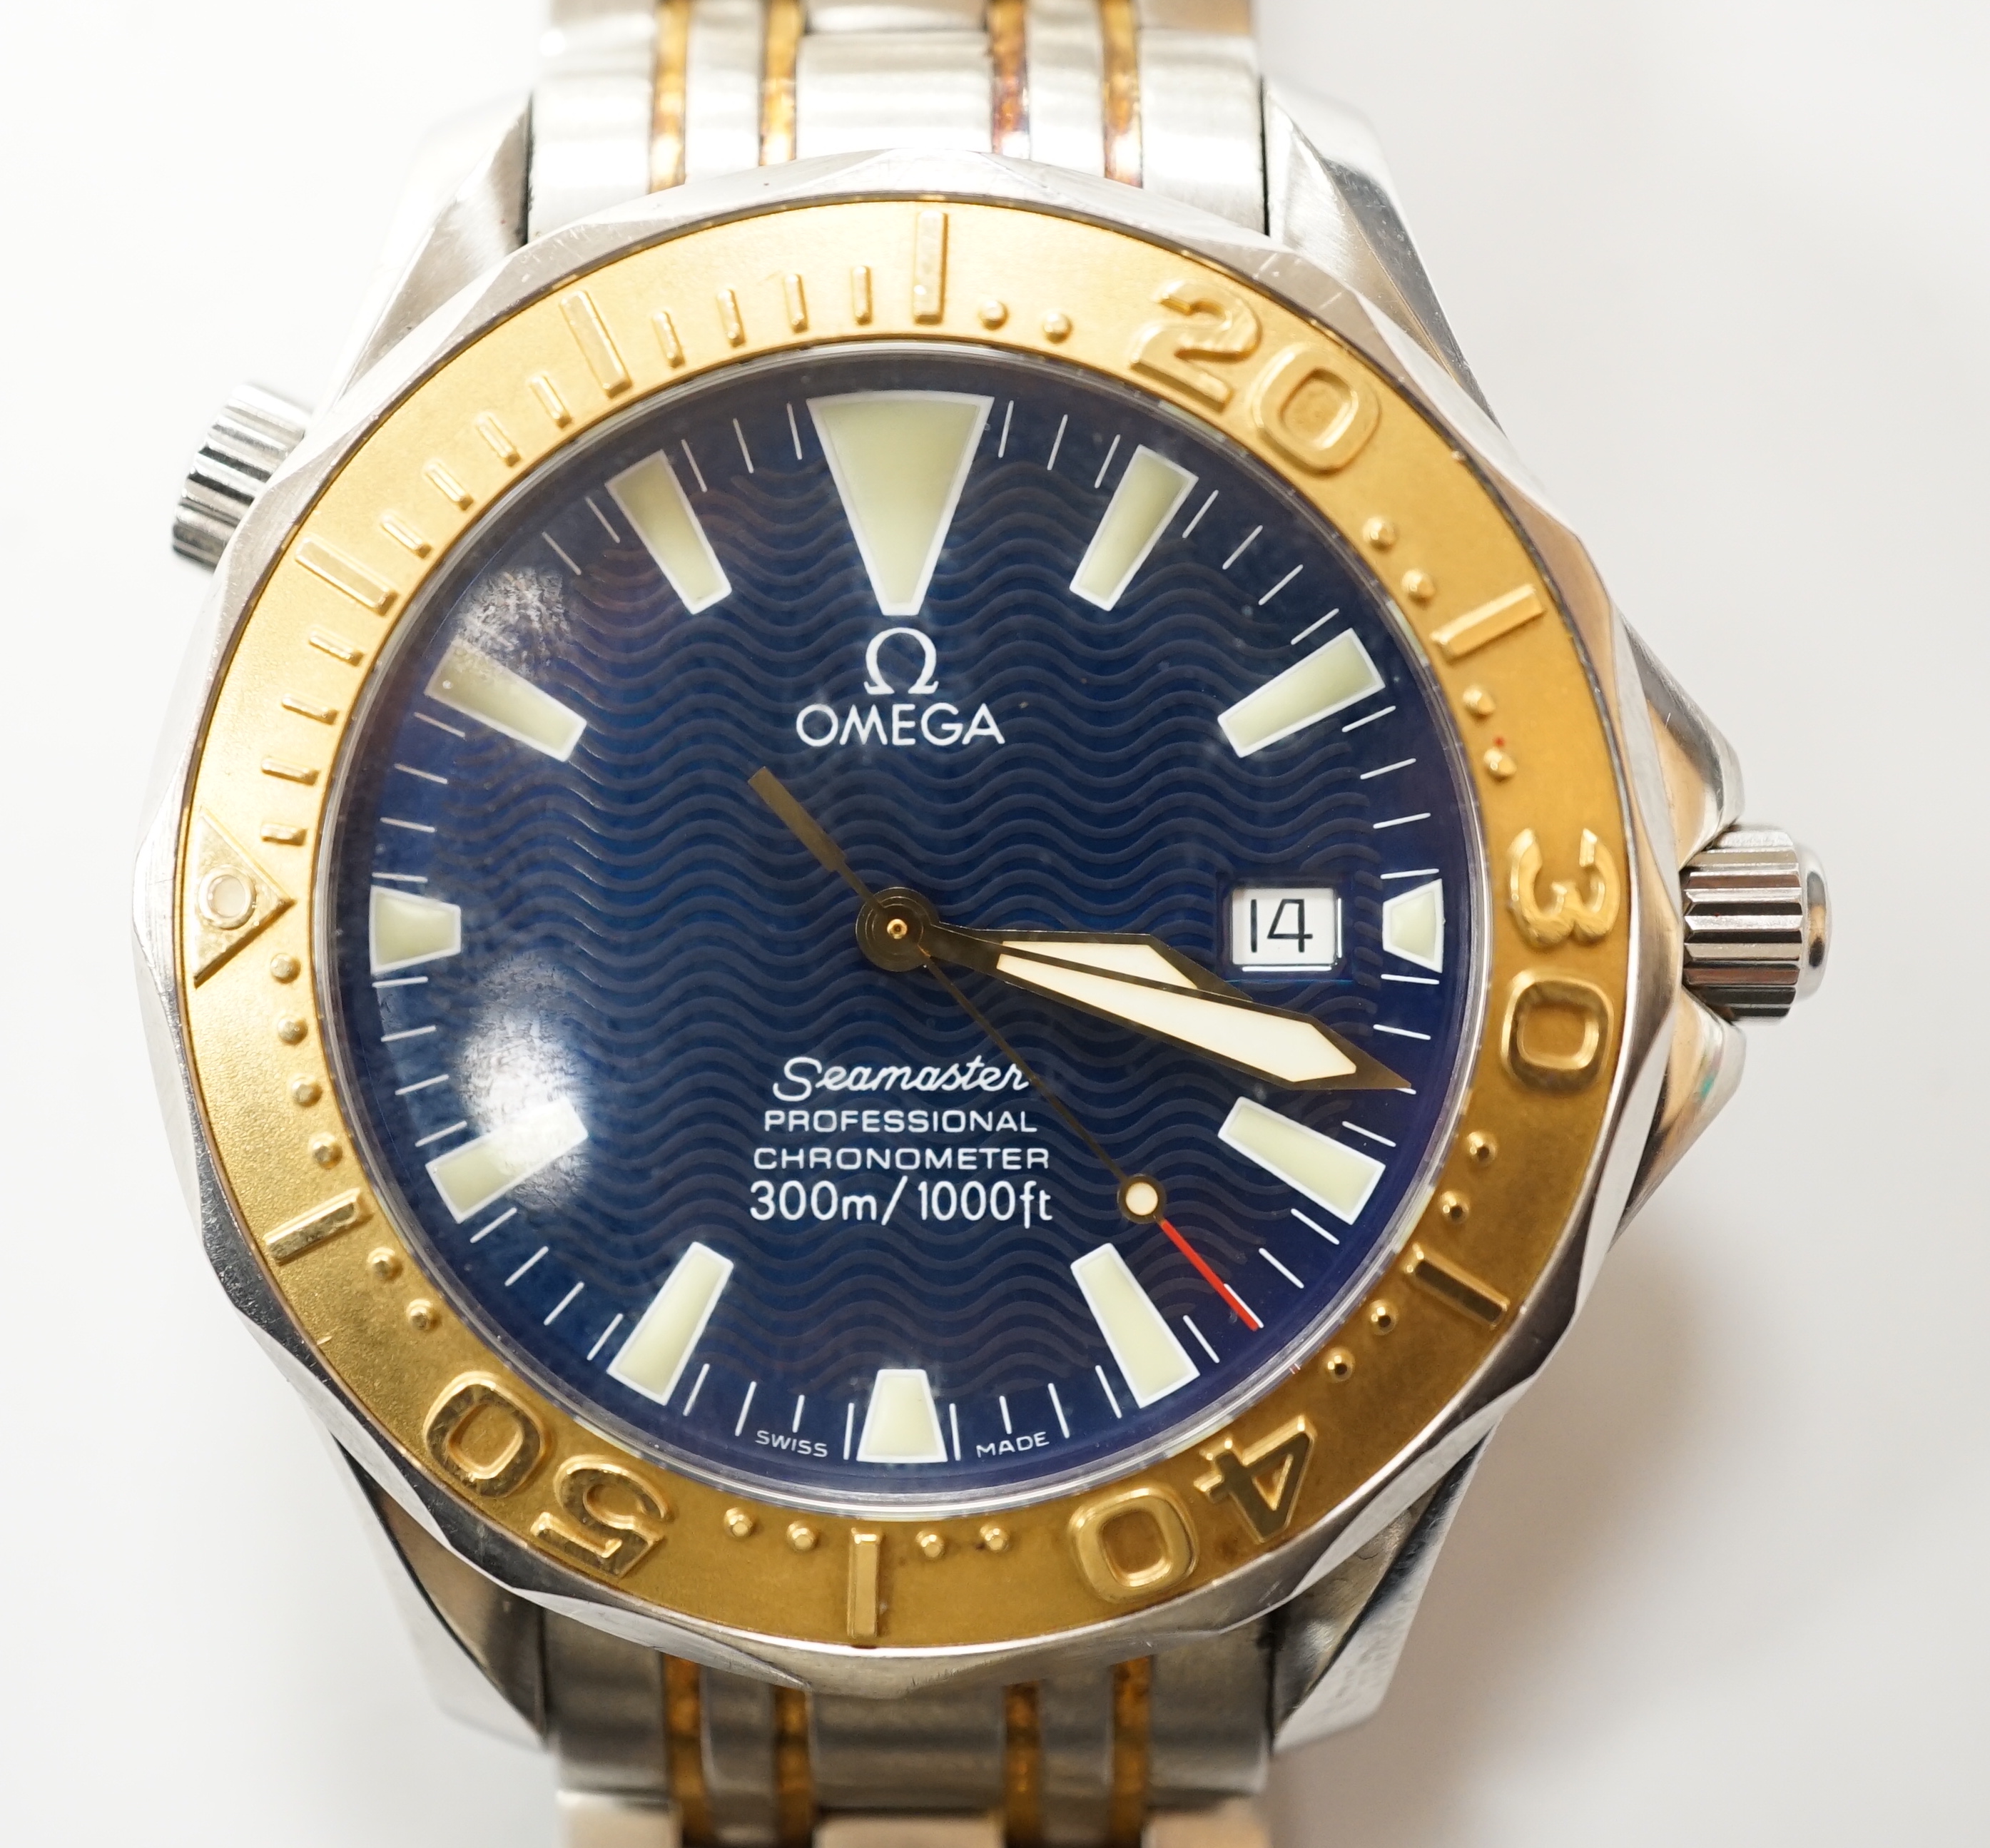 A gentleman's 2006 stainless steel Omega Seamaster Professional Chronometer wrist watch, on stainless steel Omega bracelet, case diameter 42mm, with box, no papers.